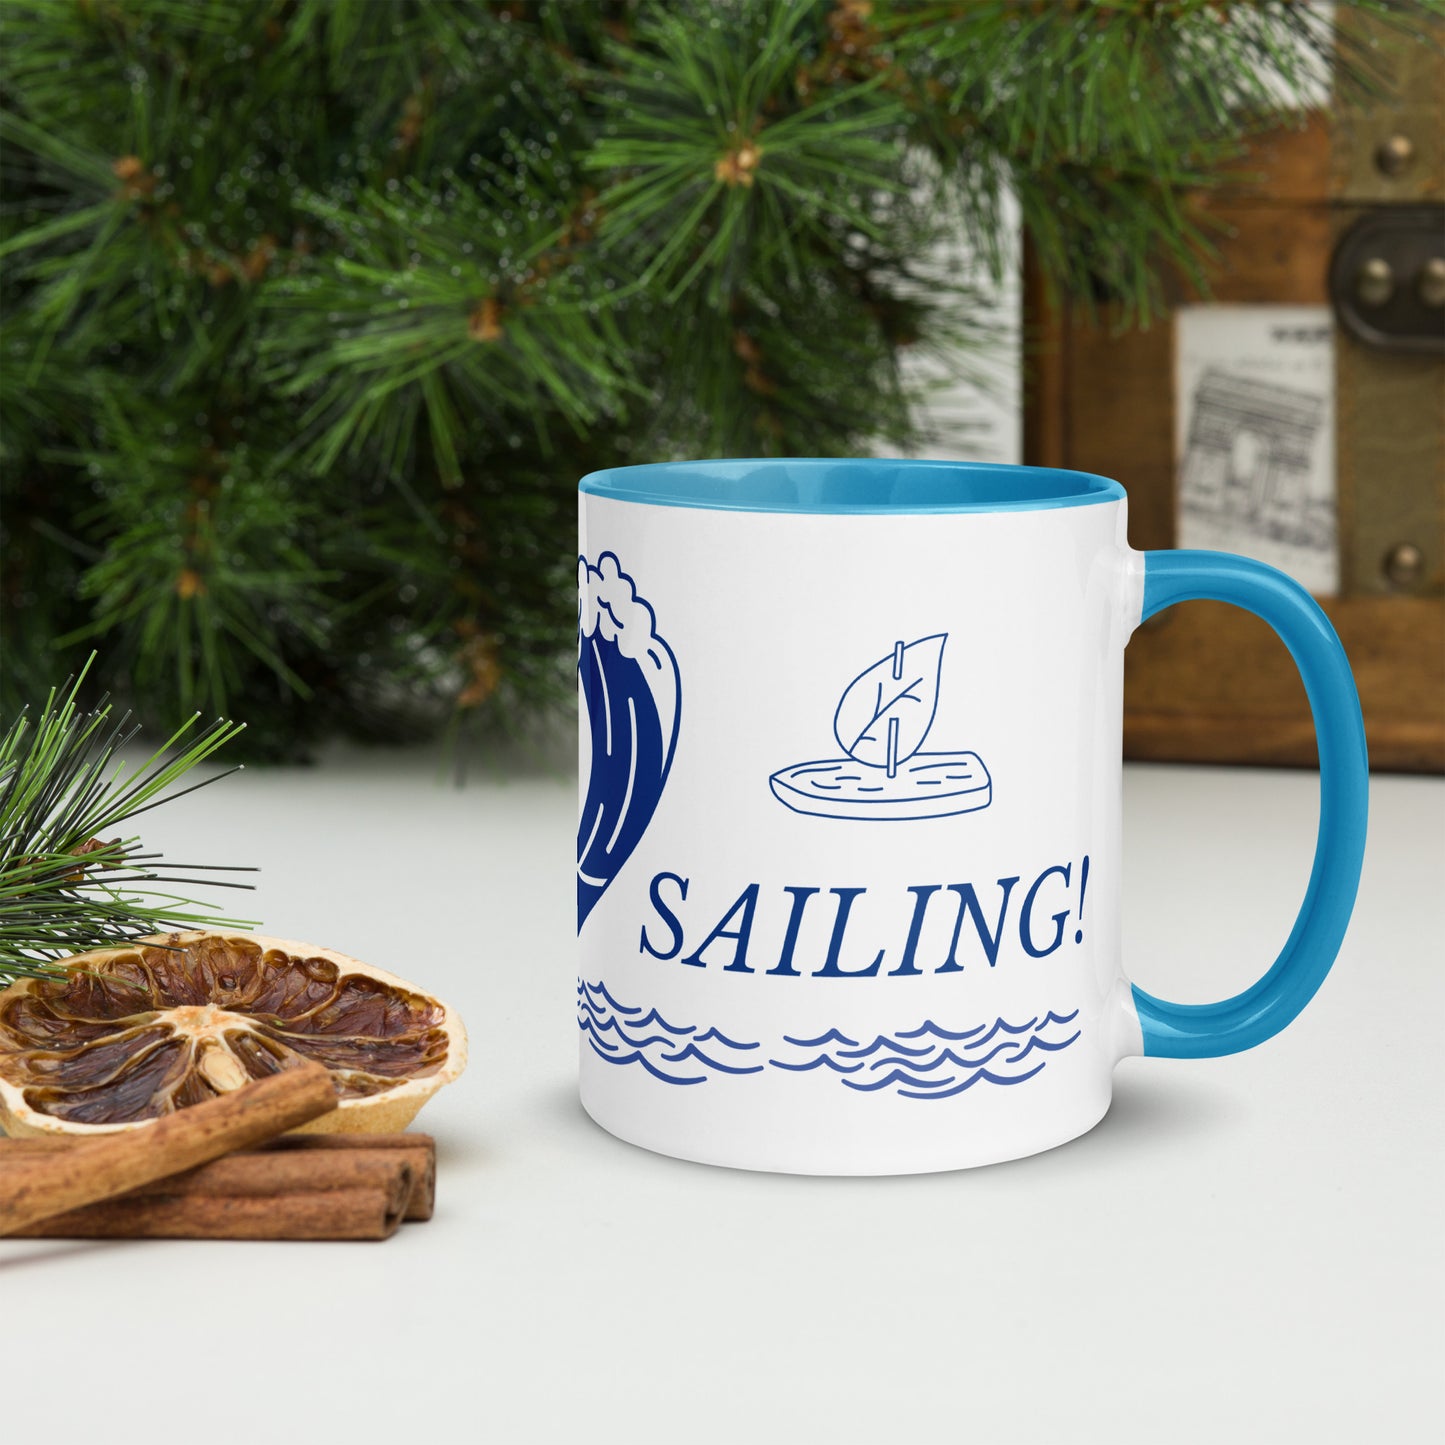 I Love Sailing Mug with Colour Inside by Our BoatyVerse